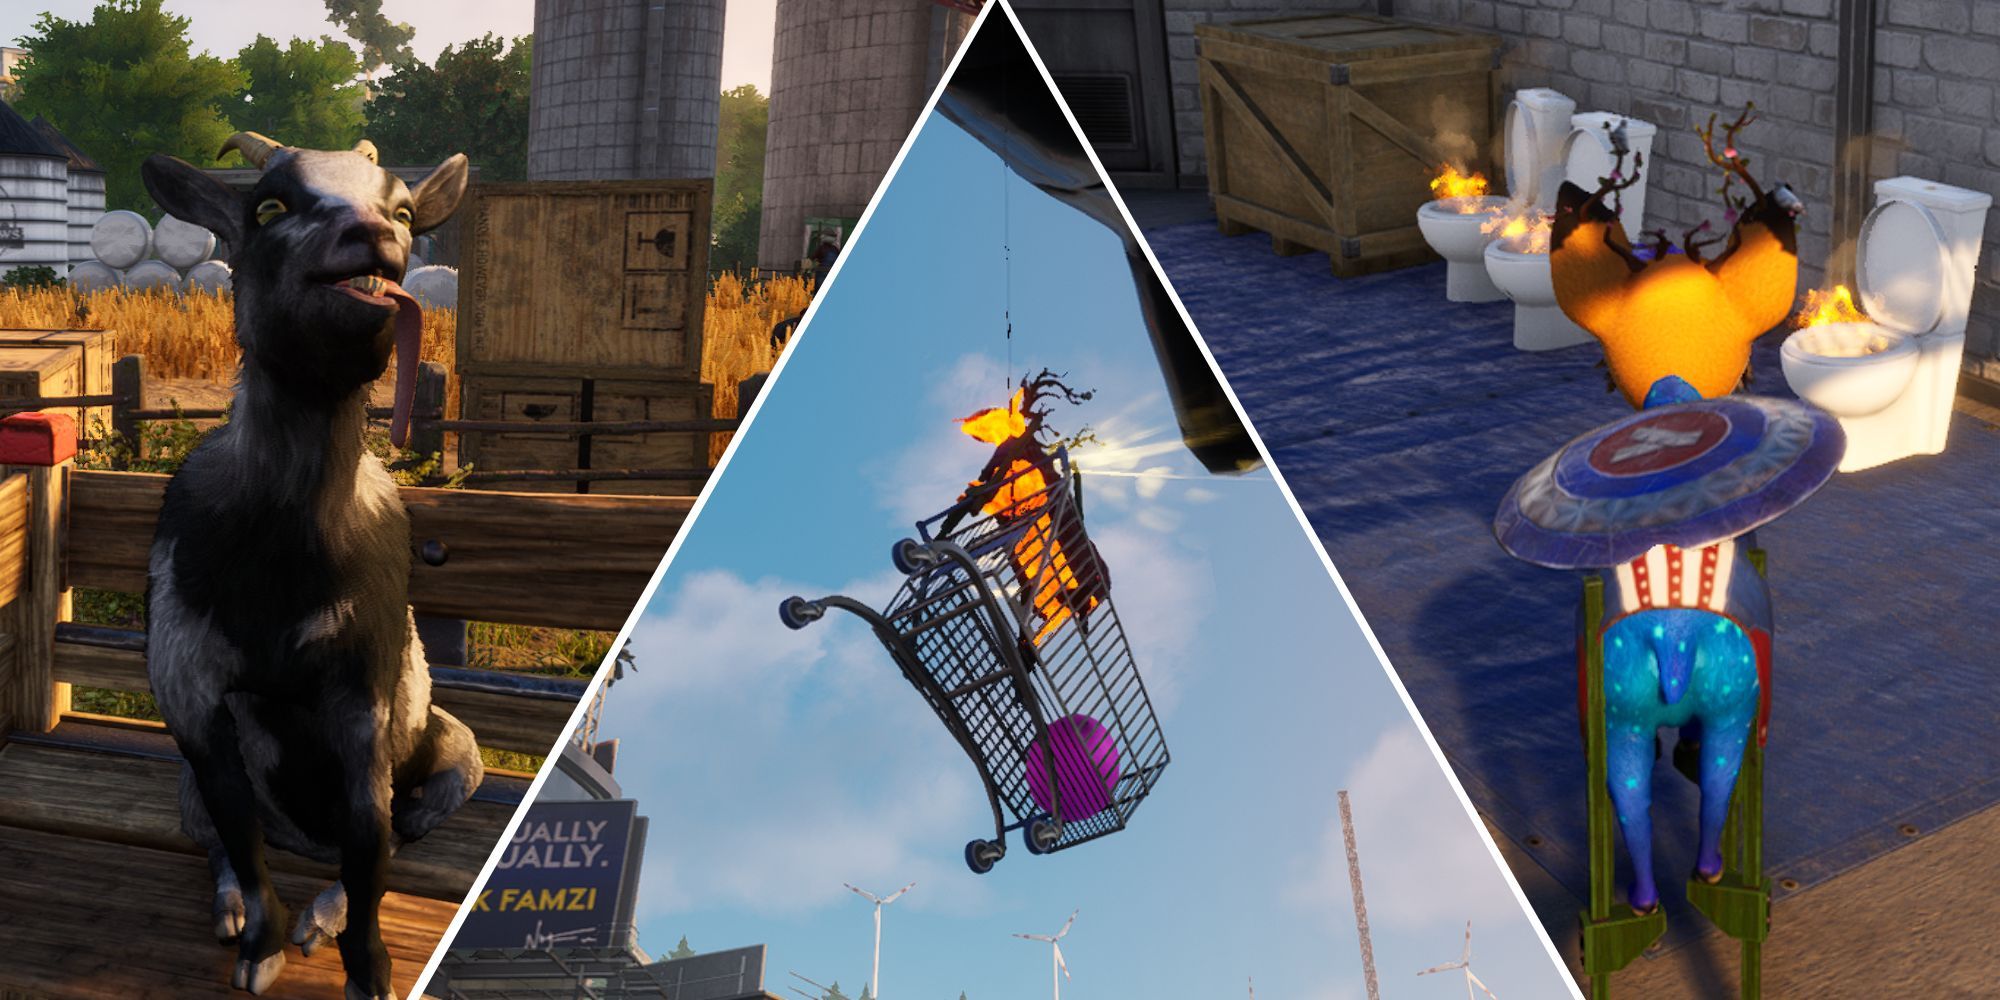 intro goat, pilgor on a grocery cart in the sky, pilgor in full gear in front of burning toilets